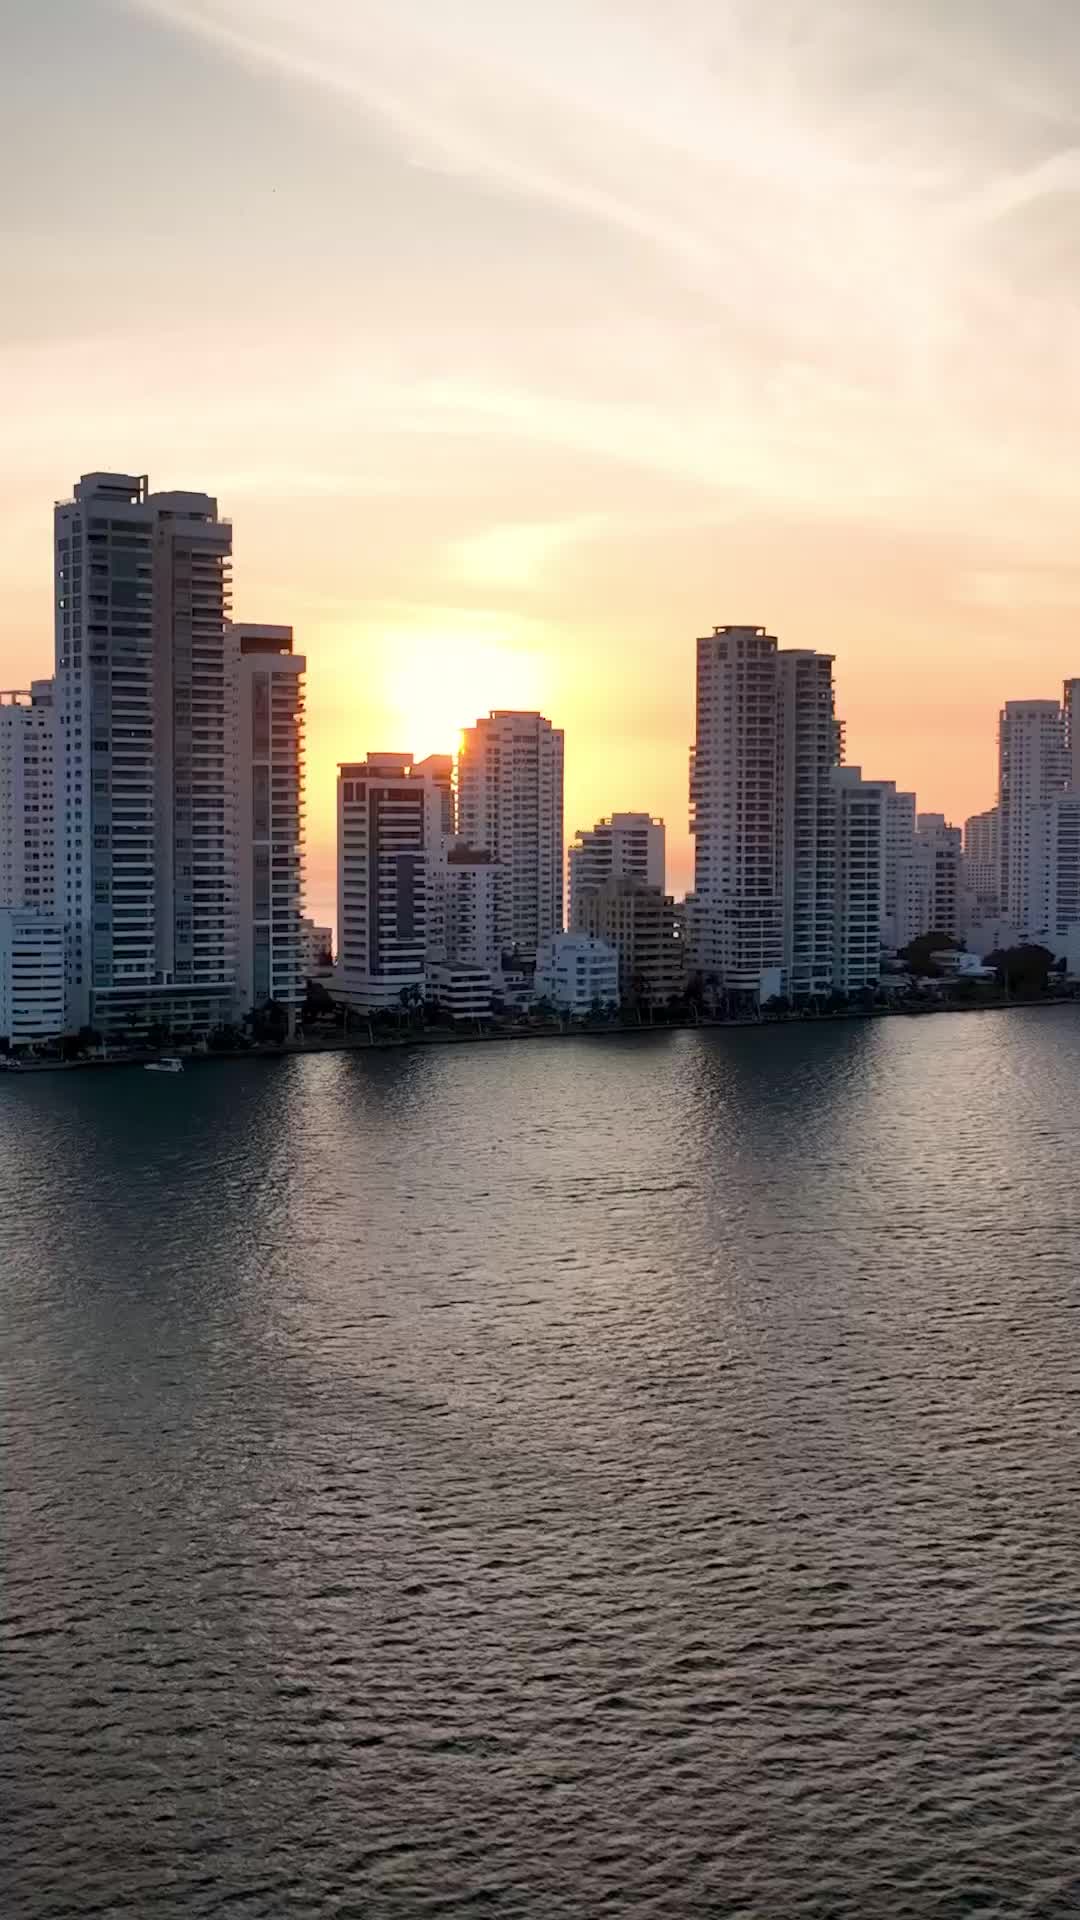 Into the sunset in Cartagena, Colombia 🛳️🌇🇨🇴
.
.
.
.
.
#cartagena#cartagenadeindias#colombia#cartagenacolombia#cartagenacity#bocagrande#visitcartagena#visitcolombia#travel#worldwalkerz